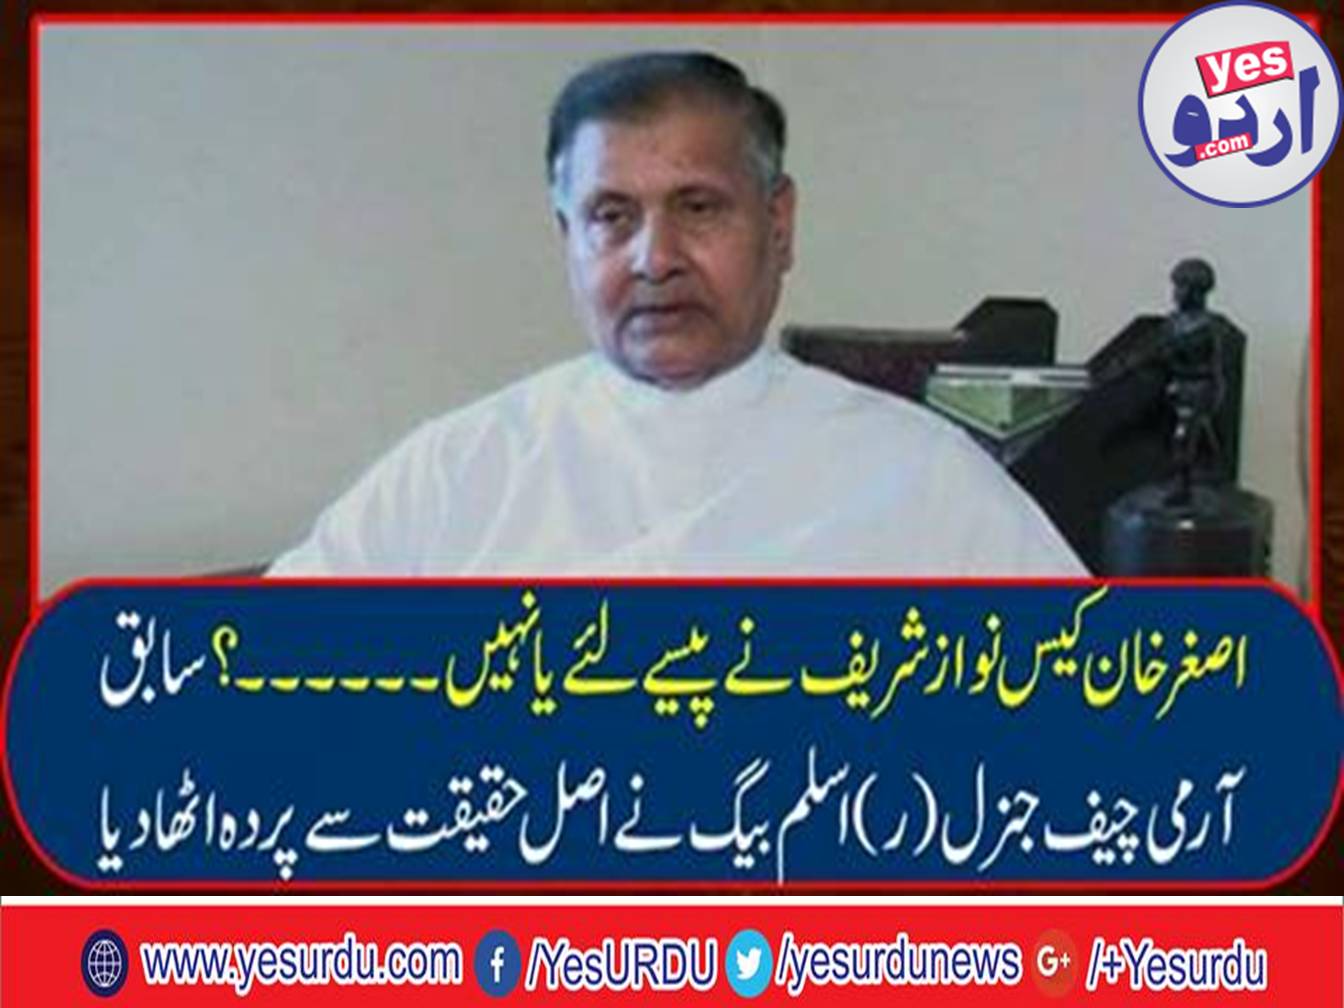 Former Army Chief General (R) Aslam Baig lifted the veil from the fact